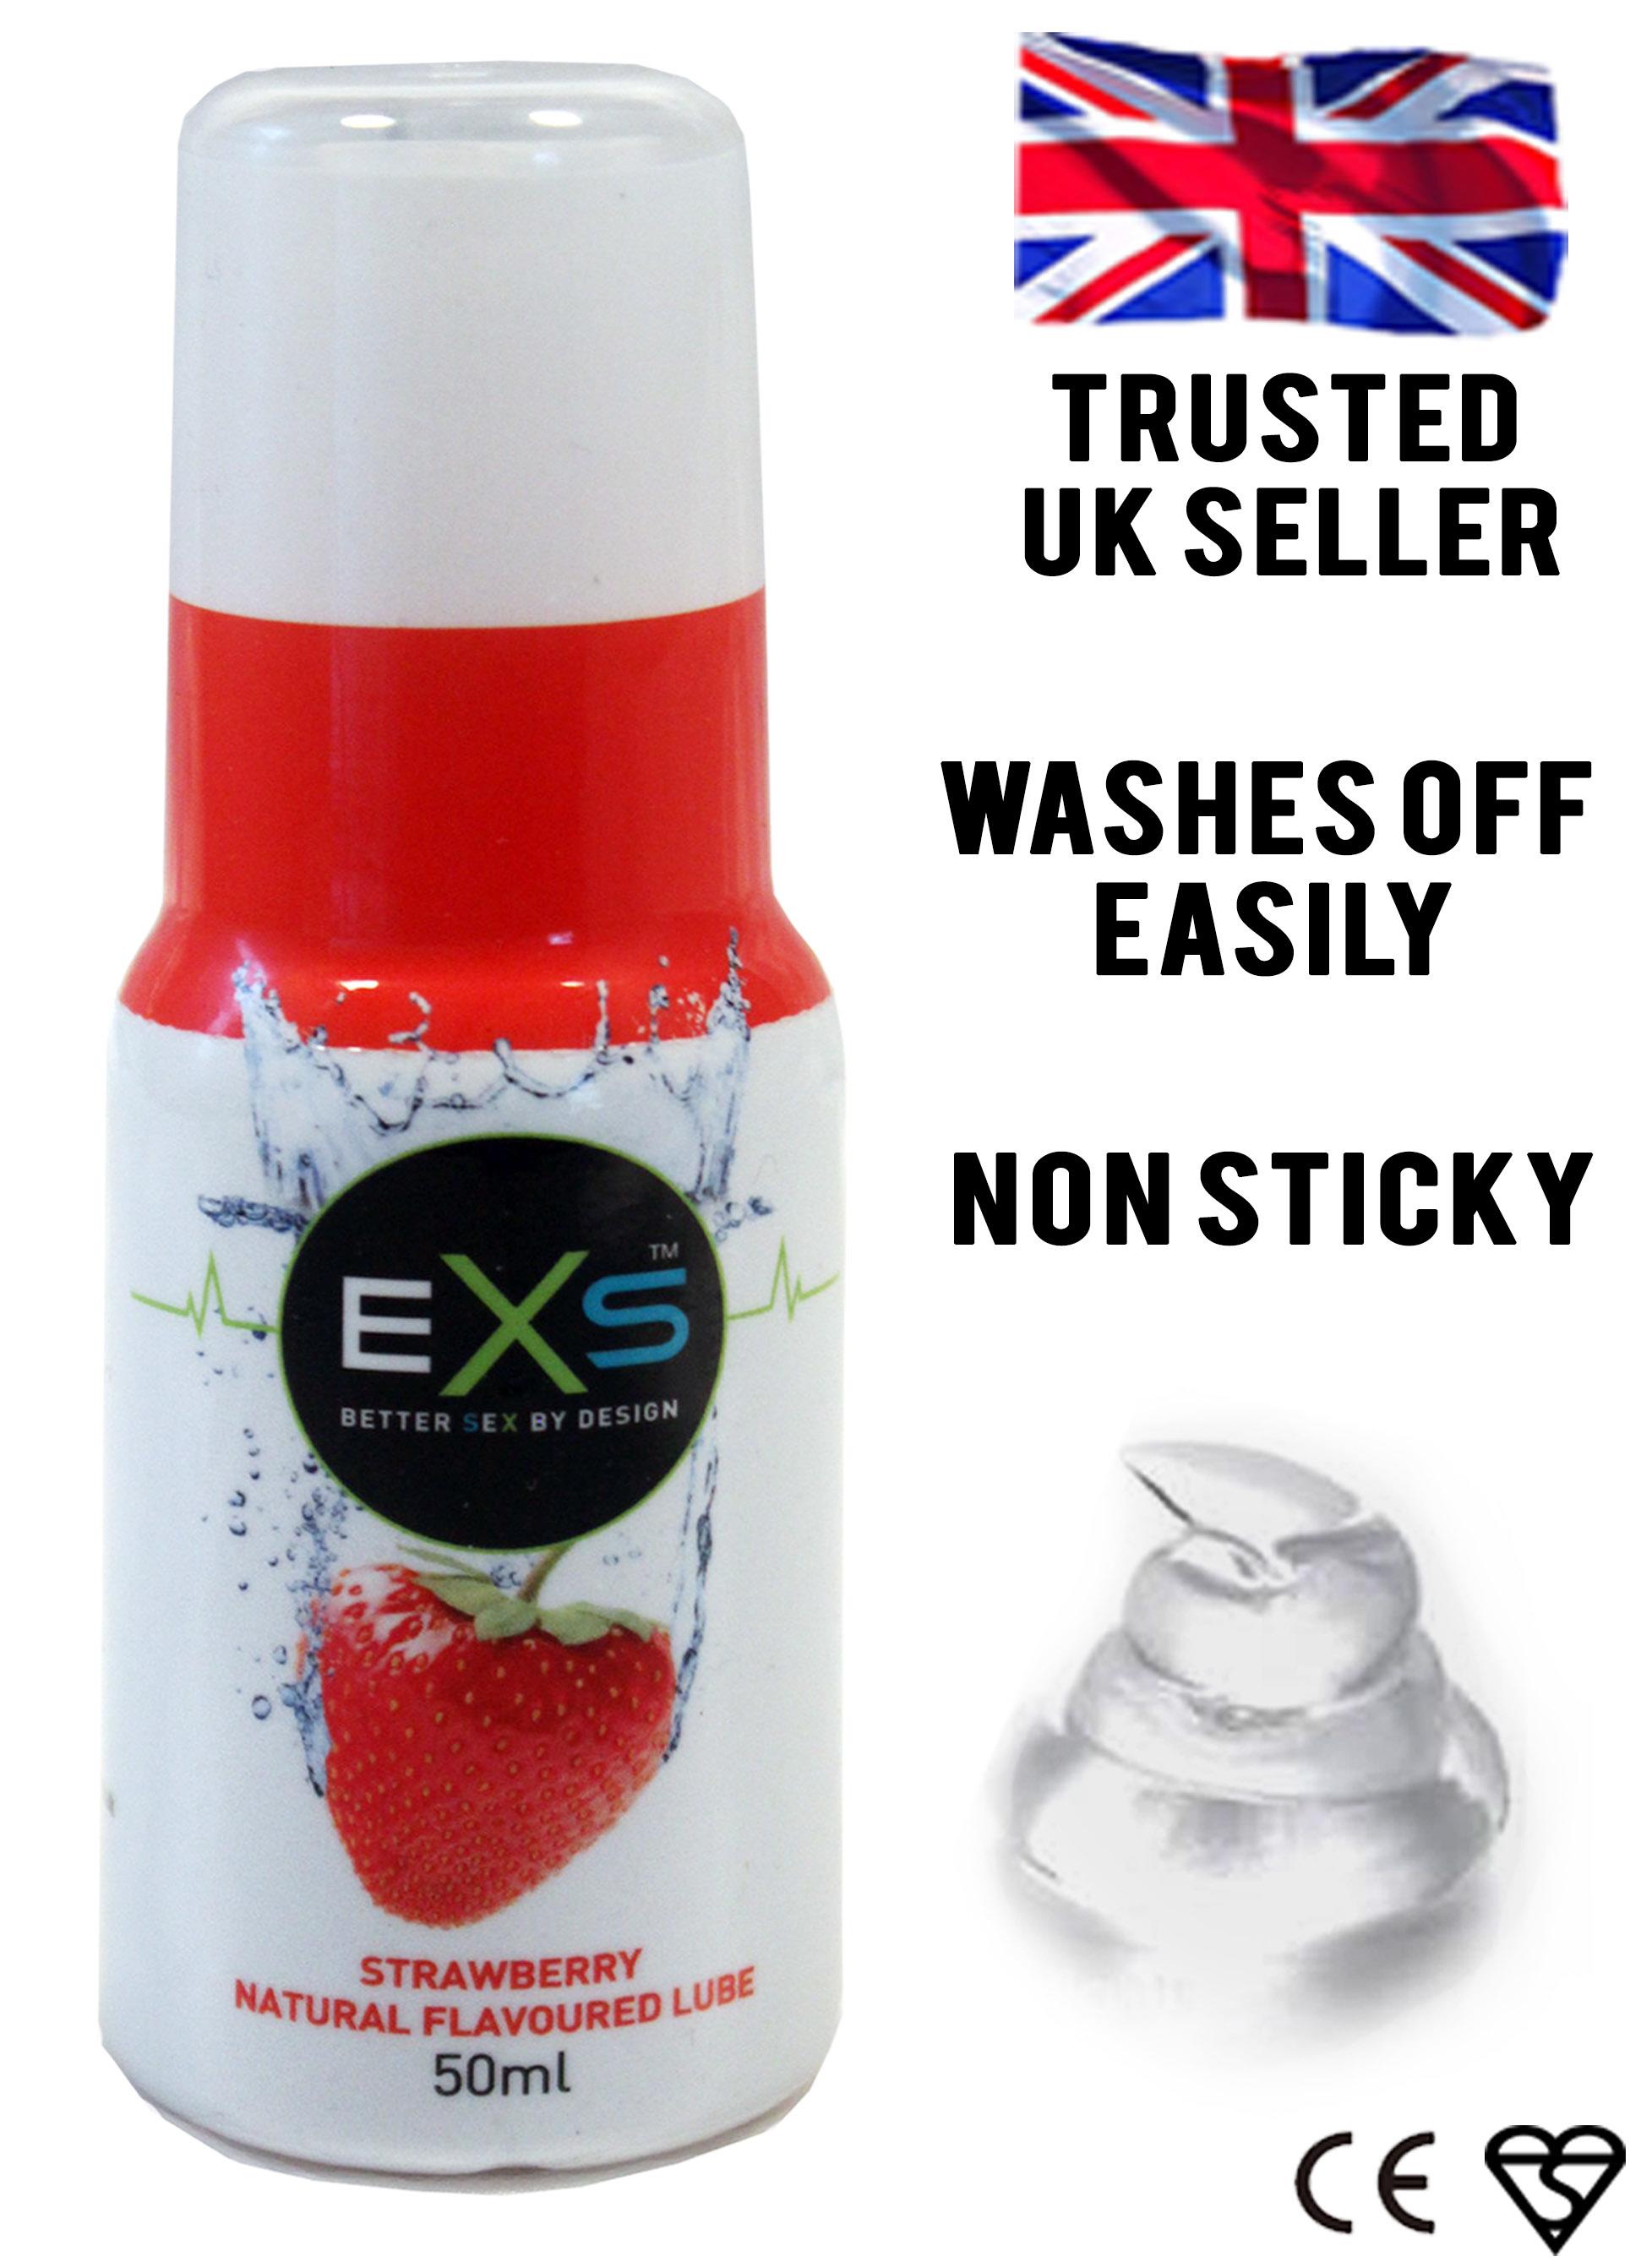 EXS Strawberry Lube Bottle 50ml annotated